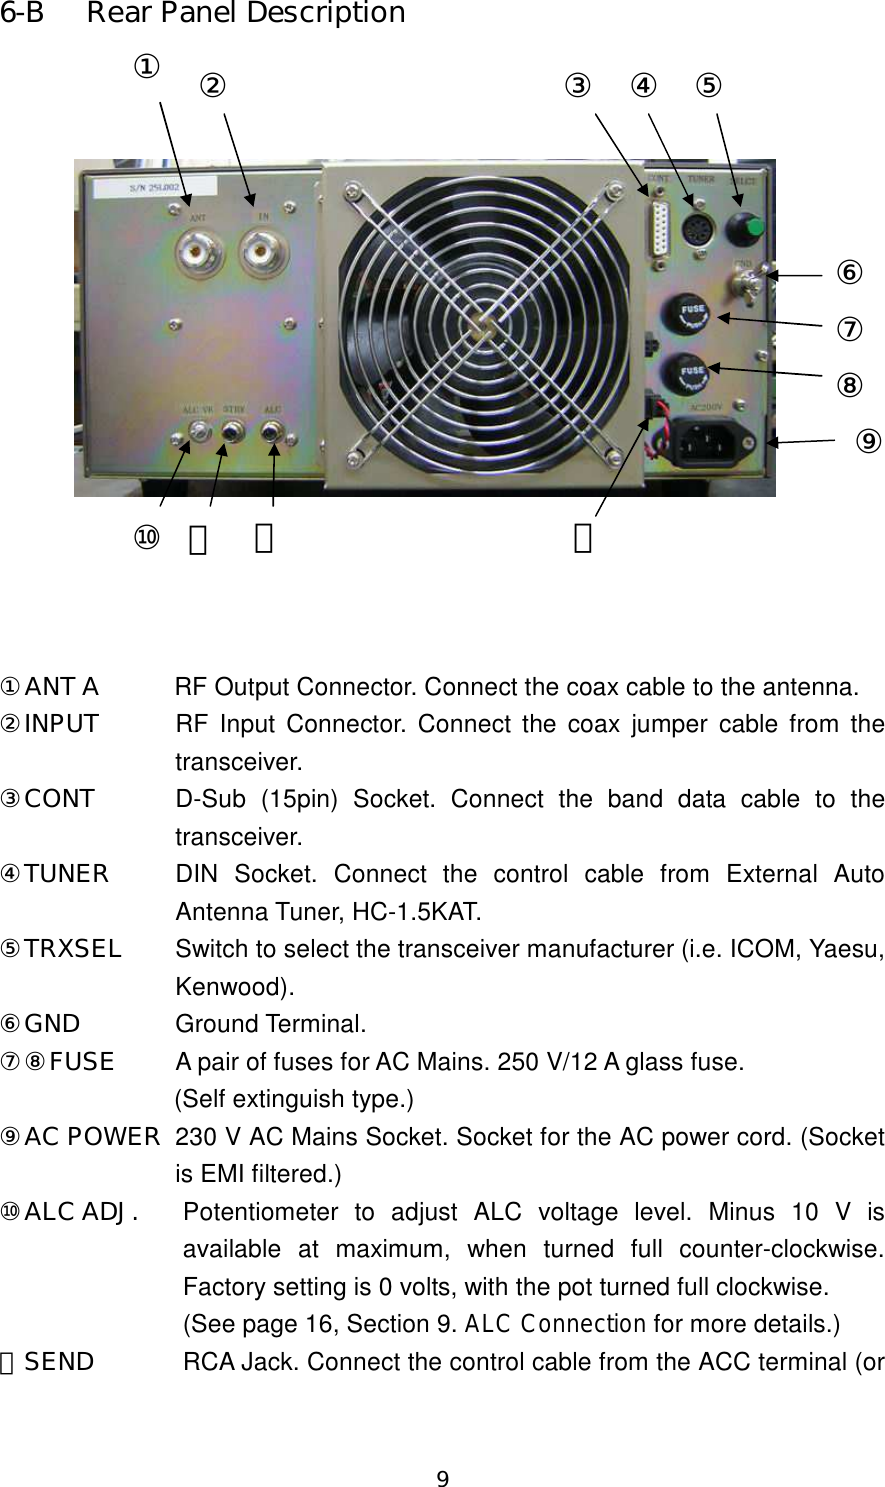 9 6-B  Rear Panel Description                  ①ANT A  RF Output Connector. Connect the coax cable to the antenna. ②INPUT  RF  Input Connector. Connect the coax  jumper cable from the transceiver. ③CONT  D-Sub  (15pin)  Socket.  Connect  the  band  data  cable  to  the transceiver. ④TUNER  DIN  Socket.  Connect  the  control  cable  from  External  Auto Antenna Tuner, HC-1.5KAT. ⑤TRXSEL  Switch to select the transceiver manufacturer (i.e. ICOM, Yaesu, Kenwood). ⑥GND Ground Terminal. ⑦⑧FUSE  A pair of fuses for AC Mains. 250 V/12 A glass fuse.   (Self extinguish type.) ⑨AC POWER  230 V AC Mains Socket. Socket for the AC power cord. (Socket is EMI filtered.) ⑩ALC ADJ.  Potentiometer  to  adjust  ALC  voltage  level.  Minus  10  V  is available  at  maximum,  when  turned  full  counter-clockwise. Factory setting is 0 volts, with the pot turned full clockwise.   (See page 16, Section 9. ALC Connection for more details.) ⑪SEND  RCA Jack. Connect the control cable from the ACC terminal (or ① ② ③ ④ ⑤ ⑥ ⑦ ⑧ ⑨ ⑬ ⑫ ⑪ ⑩ 